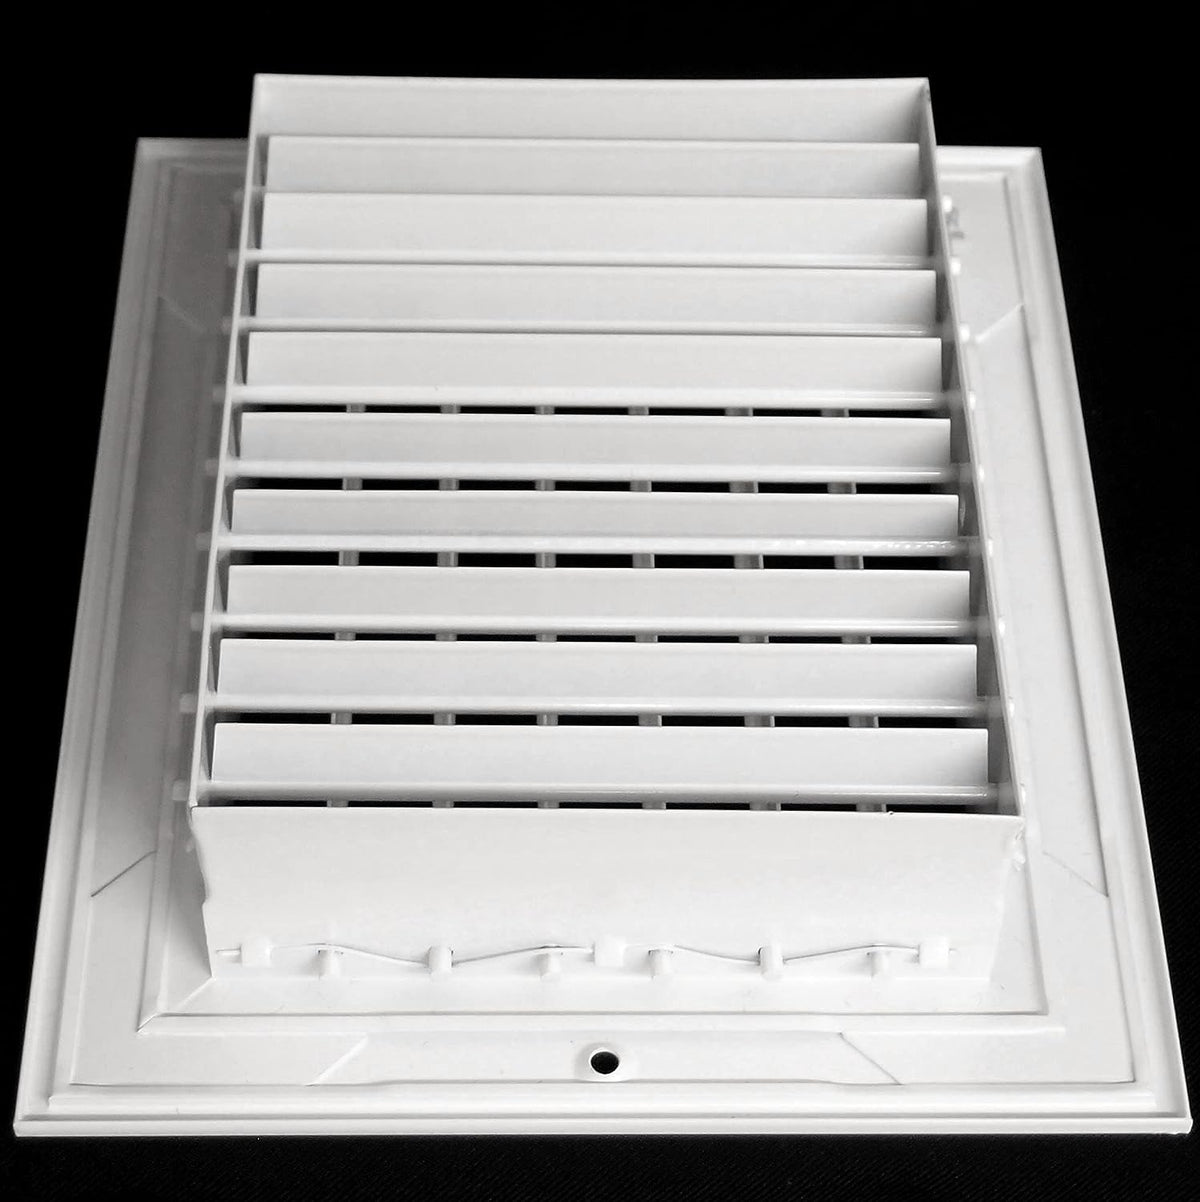 12&quot;w X 10&quot;h Aluminum Double Deflection Adjustable Air Supply HVAC Diffuser - Full Control Vertical/Horizontal Airflow Direction